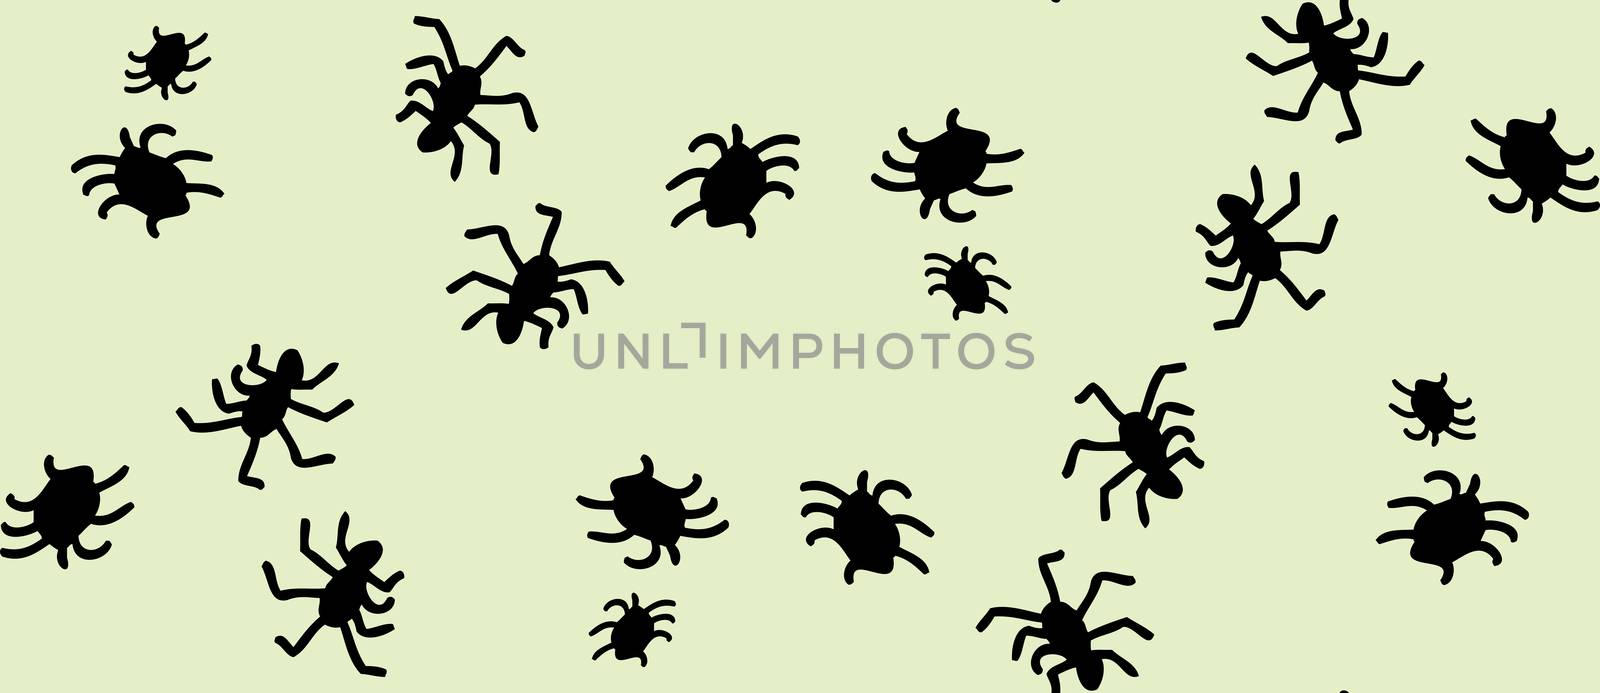 Seamless wallpaper background pattern of various spiders